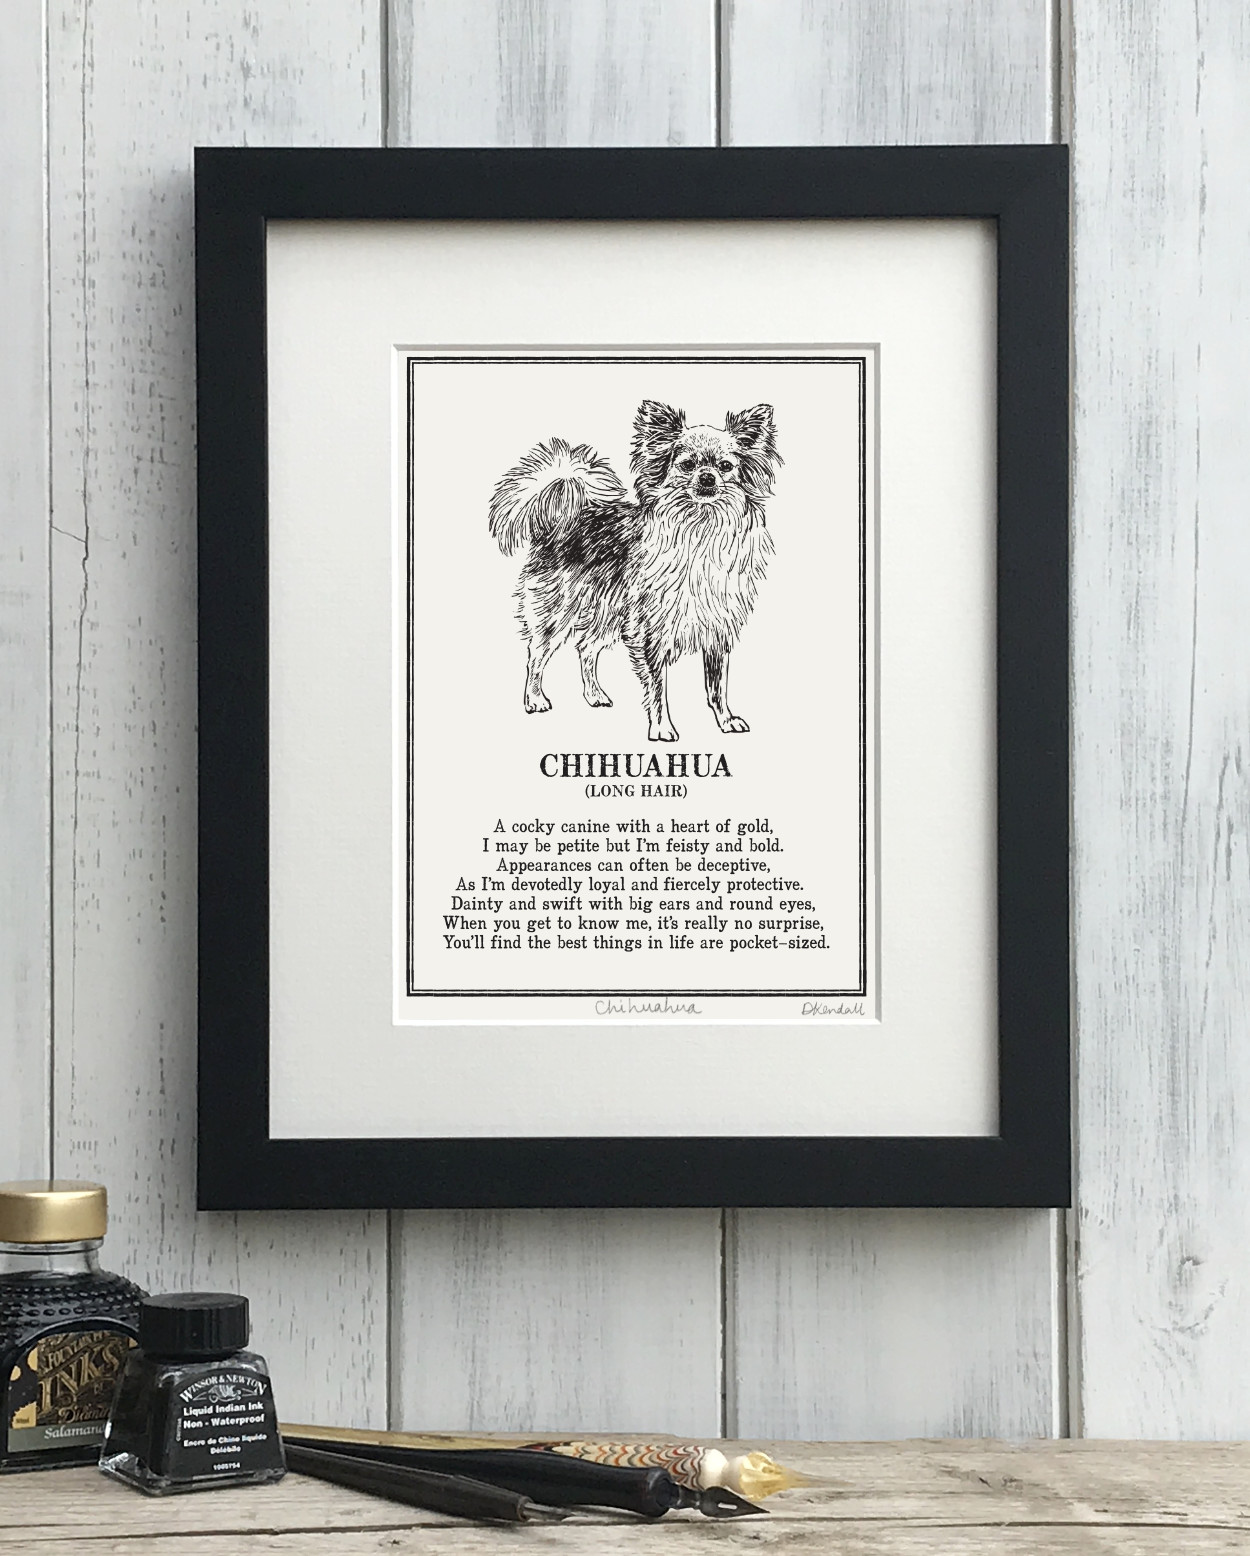 Long Haired Chihuahua Doggerel Illustrated Poem Art Print | The Enlightened Hound